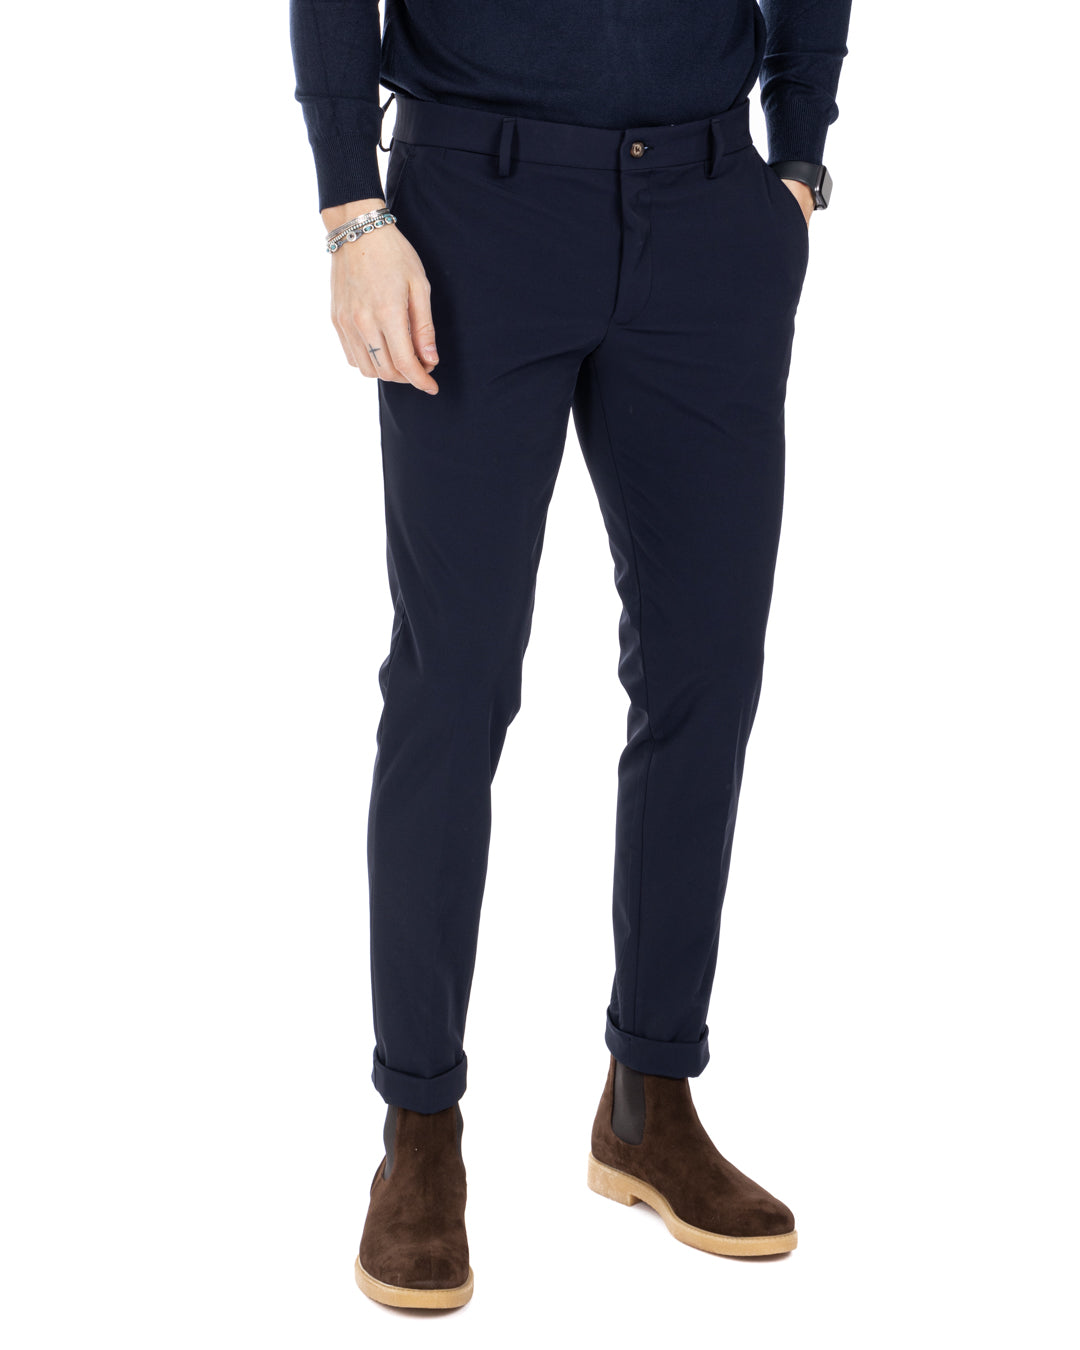 Smith - blue technical trousers